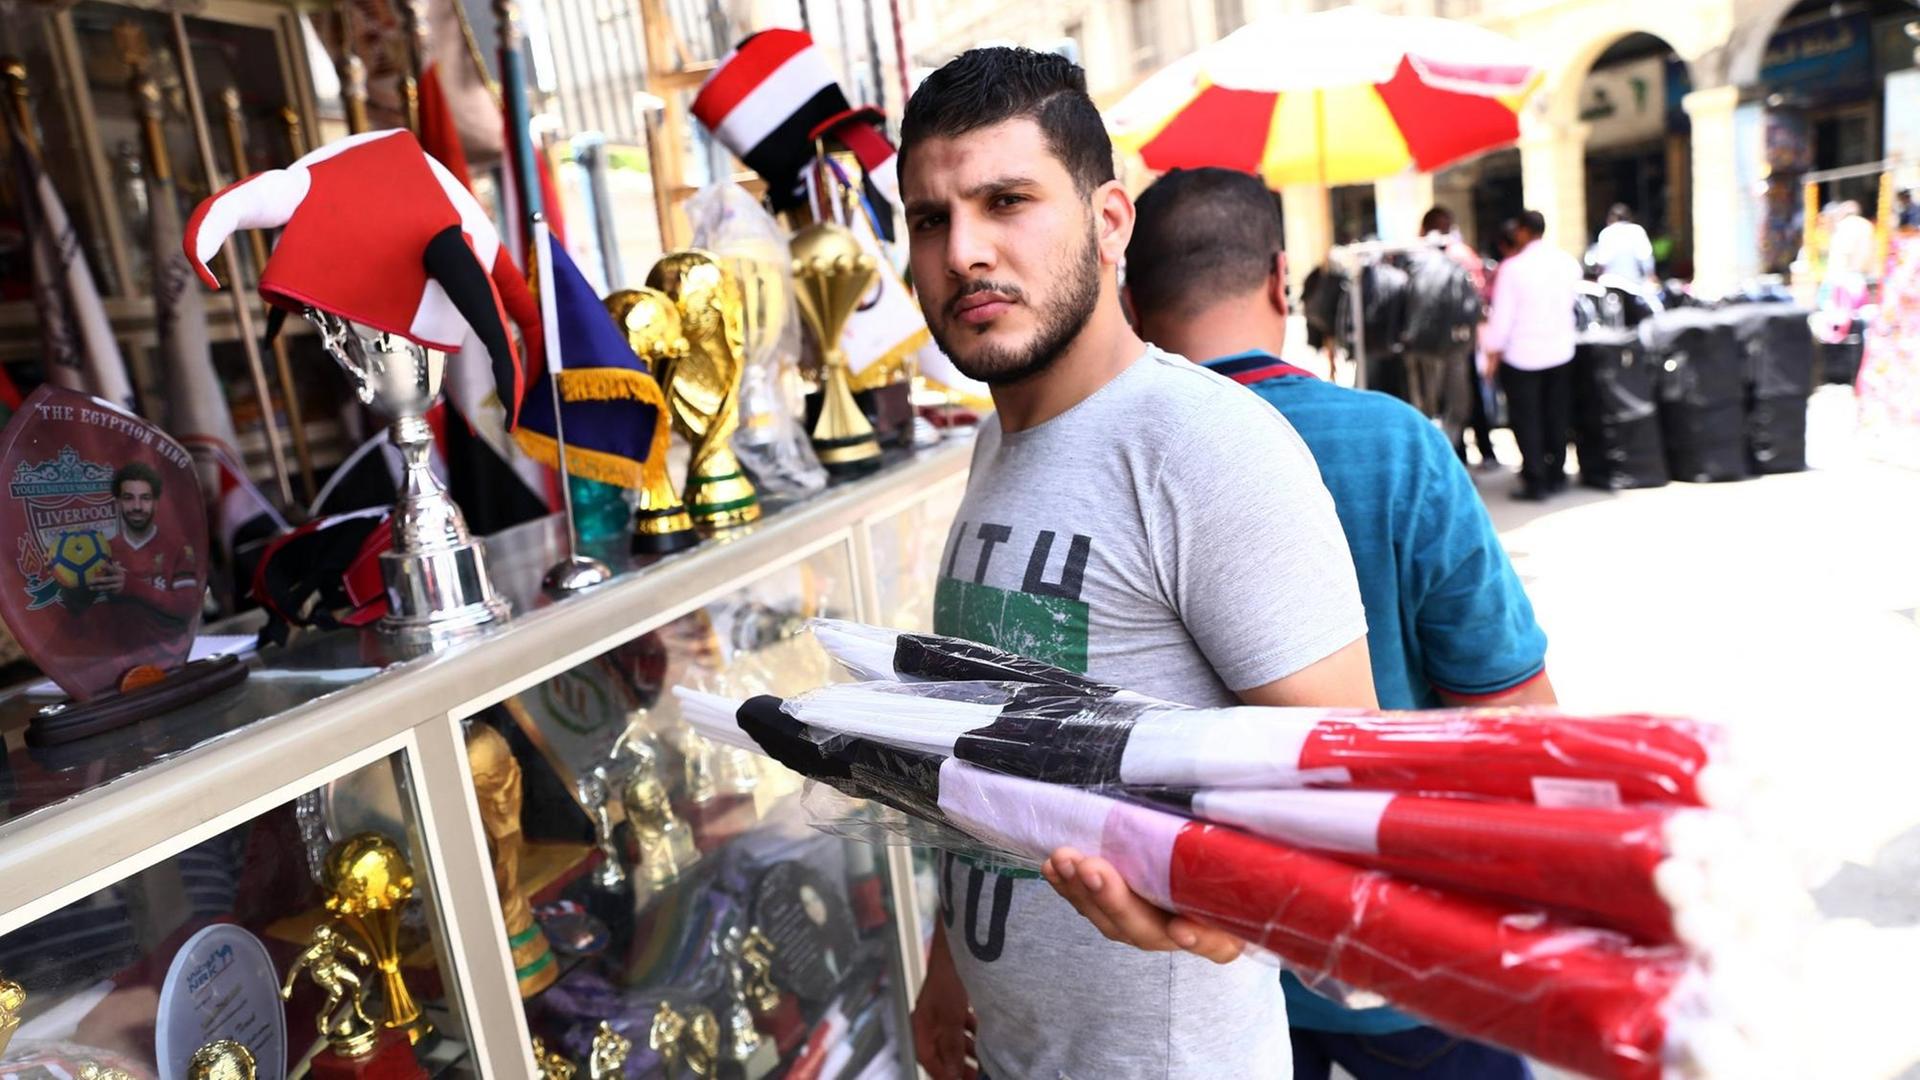 (190621) -- CAIRO, June 21, 2019 -- A man is seen at a stall selling flags in Attaba marketplace district before Africa Cup of Nations (AFCON) in Cairo, Egypt, June 20, 2019. TO GO WITH Feature: Flag sales flourish in Egypt amid Africa Cup of Nations ) EGYPT-CAIRO-AFRICAN CUP-FLAG SALES AhmedxGomaa PUBLICATIONxNOTxINxCHN